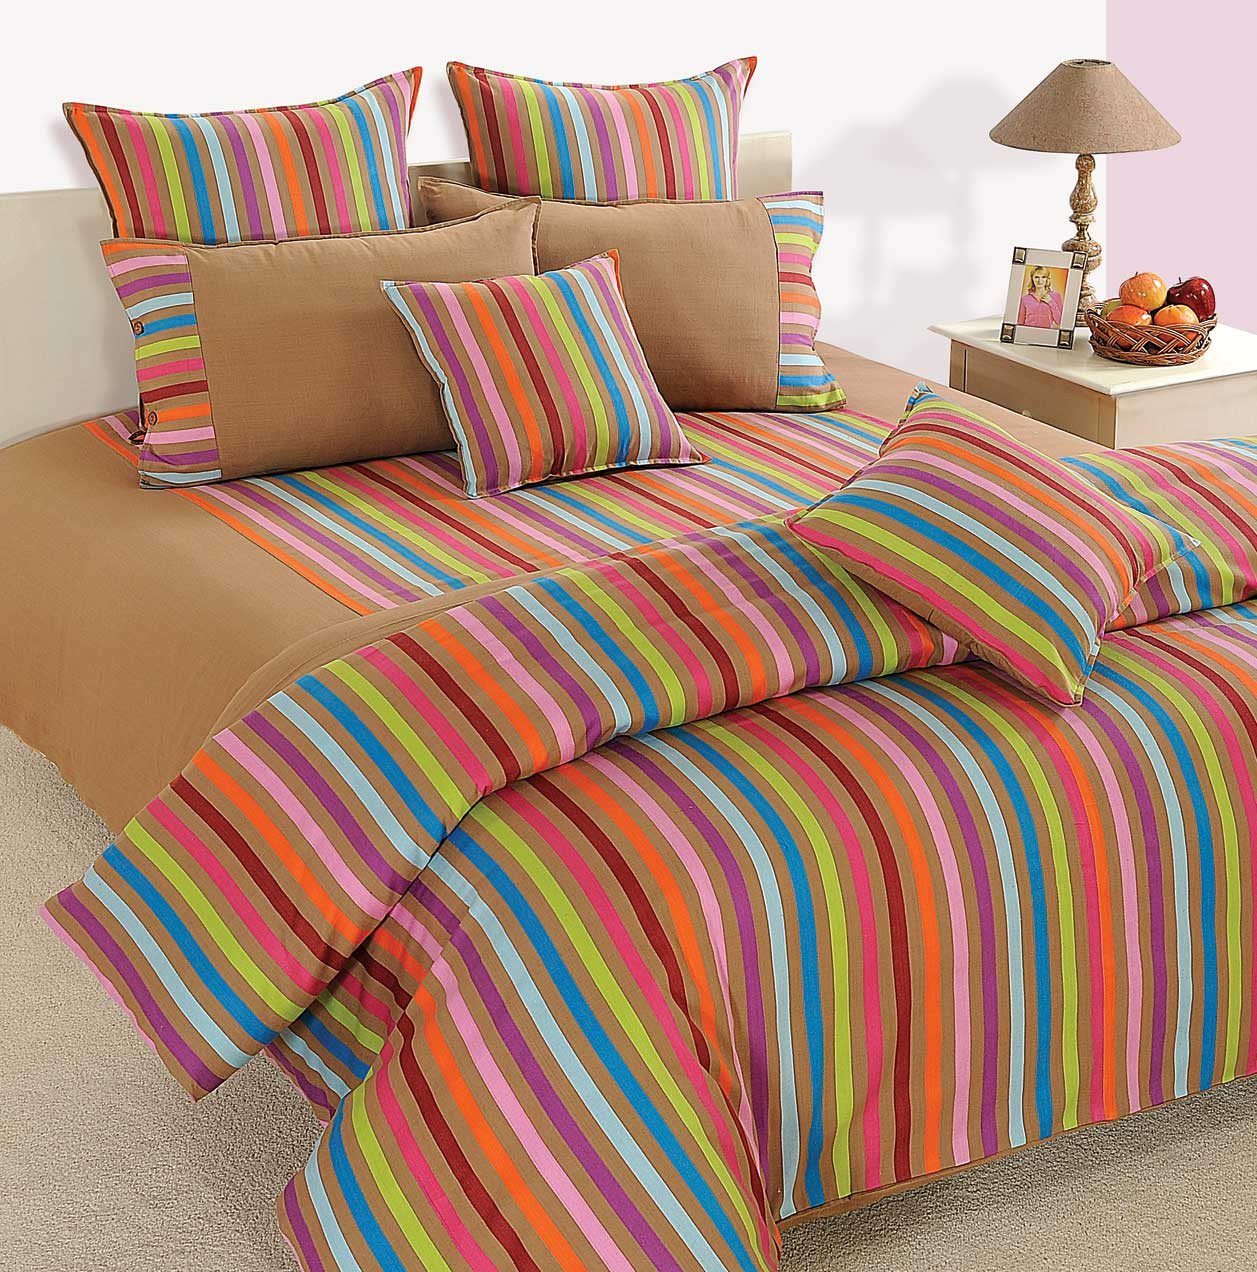 CANOPUS MULTI COLOR STRIPED DUVET COVER - Flickdeal.co.nz